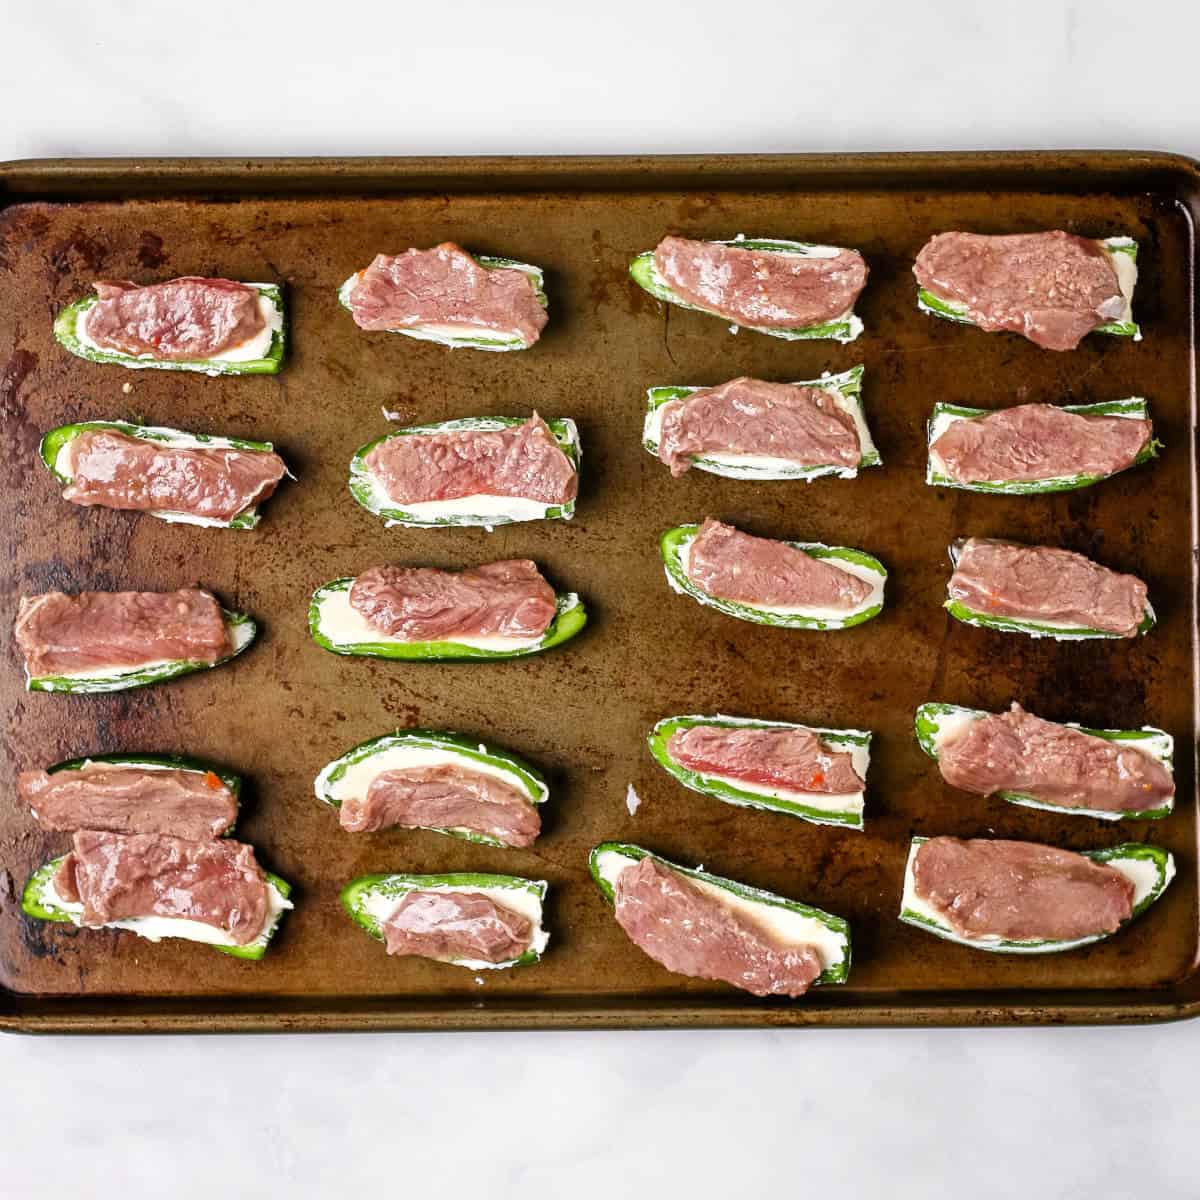 Sliced deer backstrap laying on halved jalapeno peppers stuffed with cream cheese.